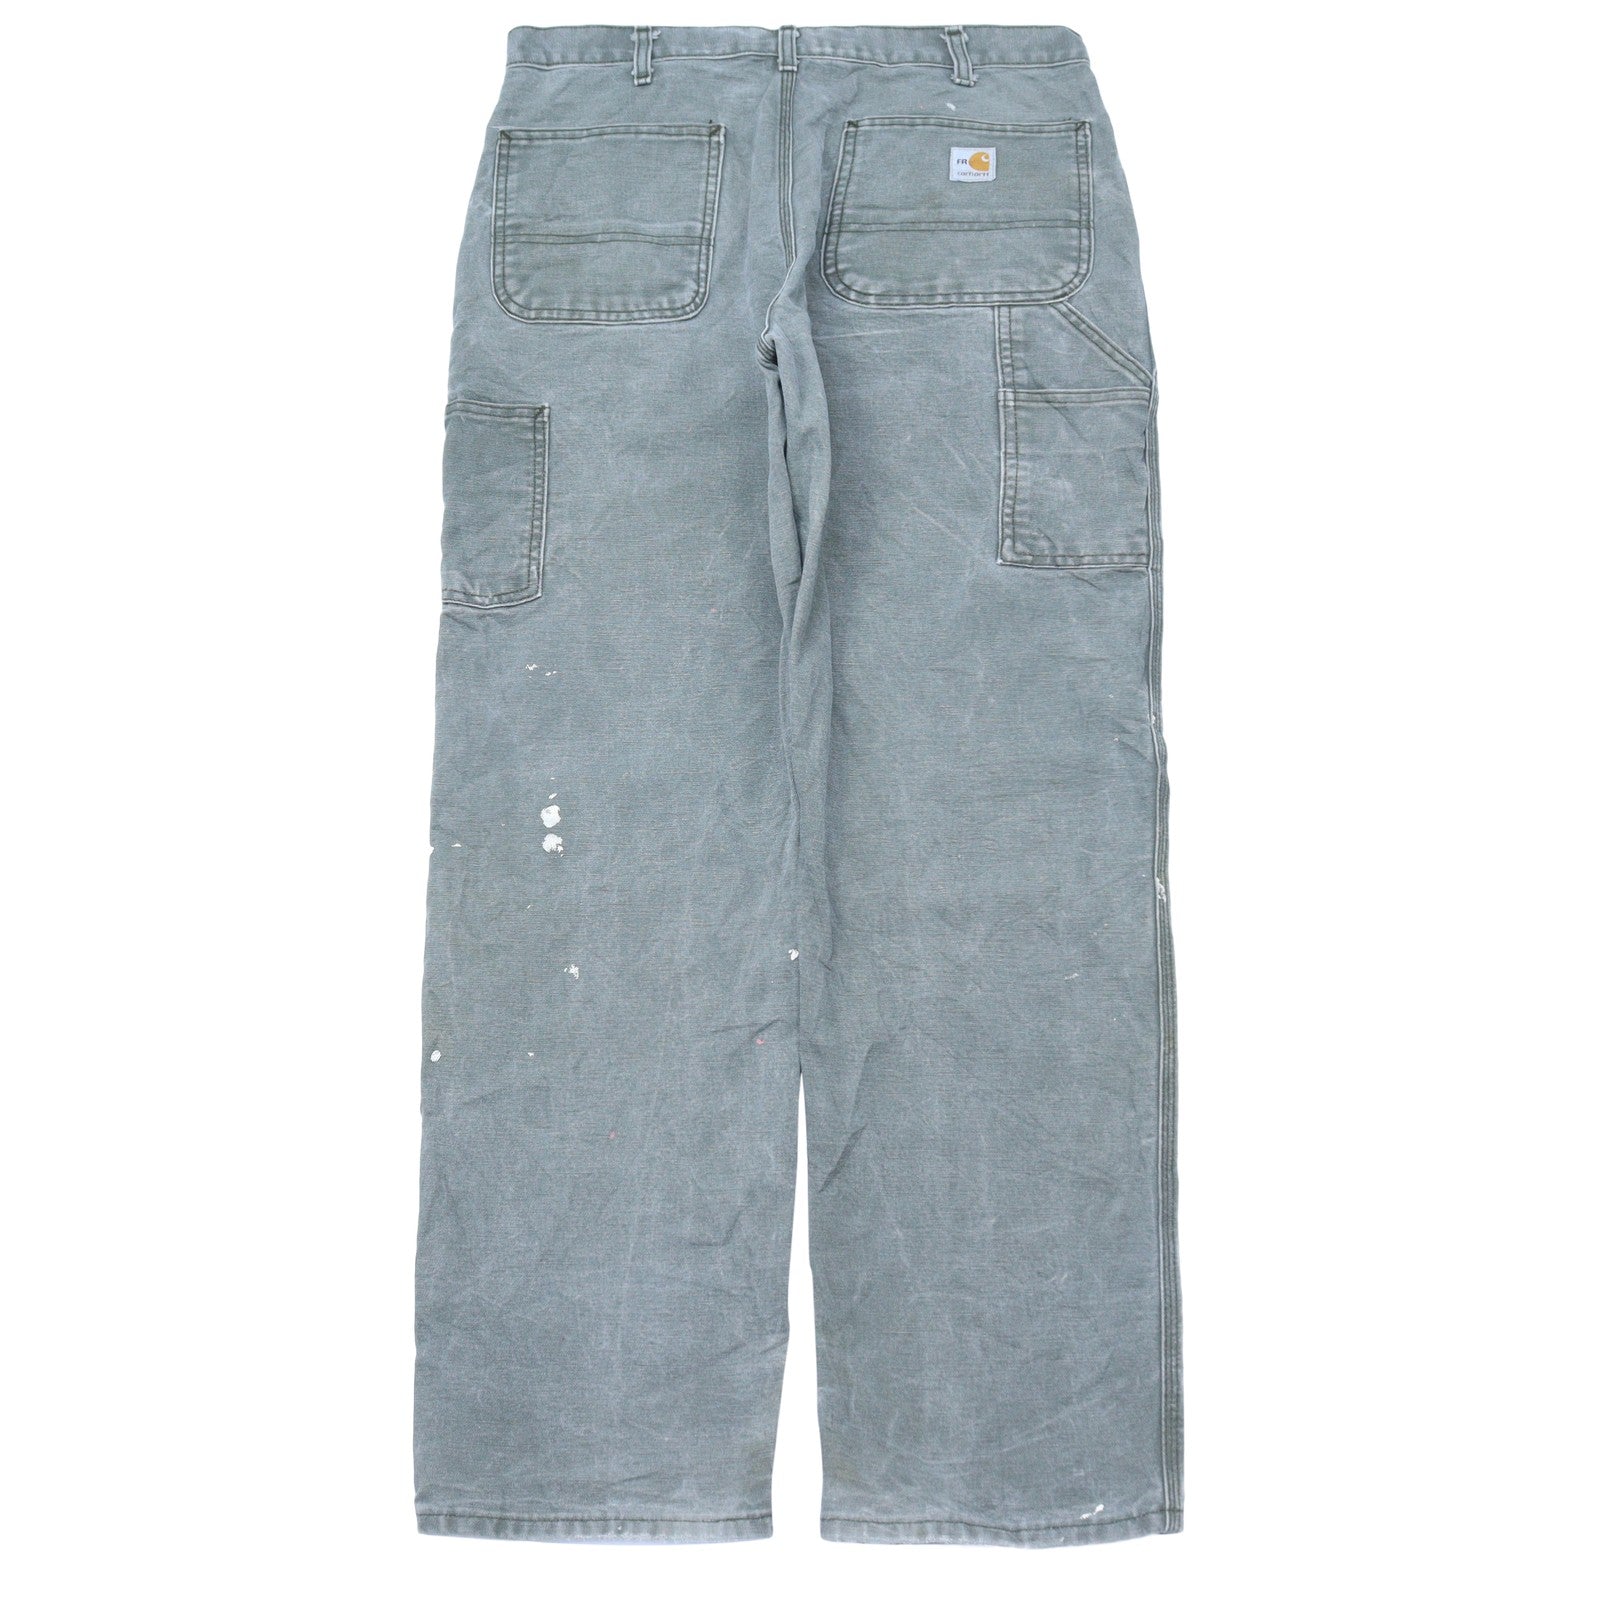 Mens Work Trousers | Snickers, Blaklader, Dickies, Scruffs, Fristads |  TuffShop.co.uk